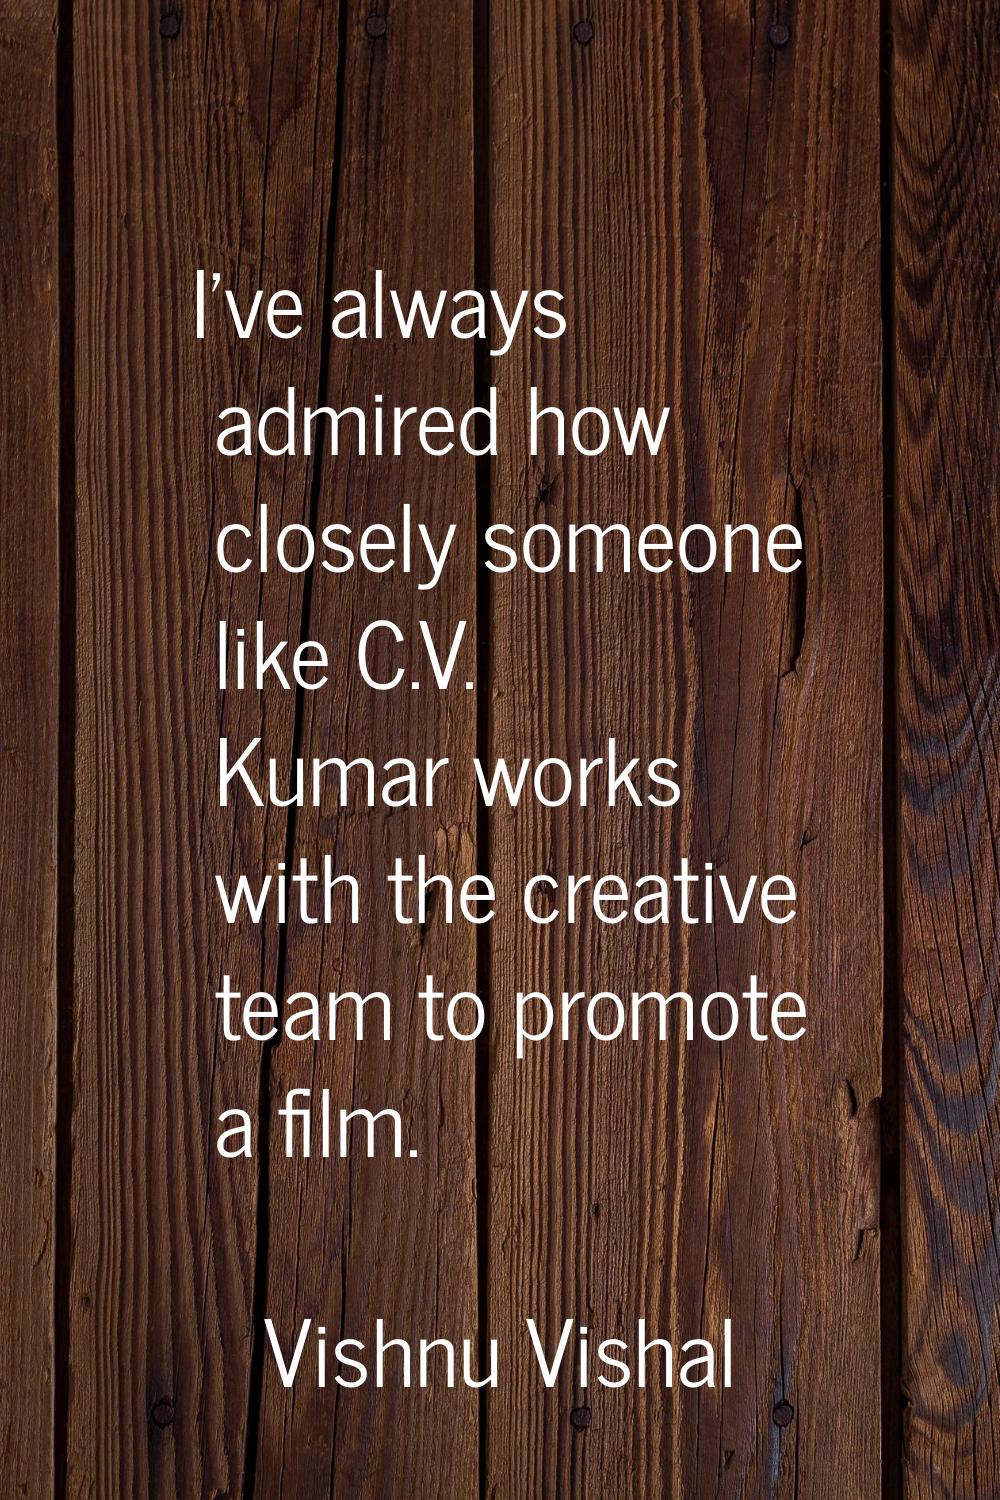 I’ve always admired how closely someone like C.V. Kumar works with the creative team to promote a f